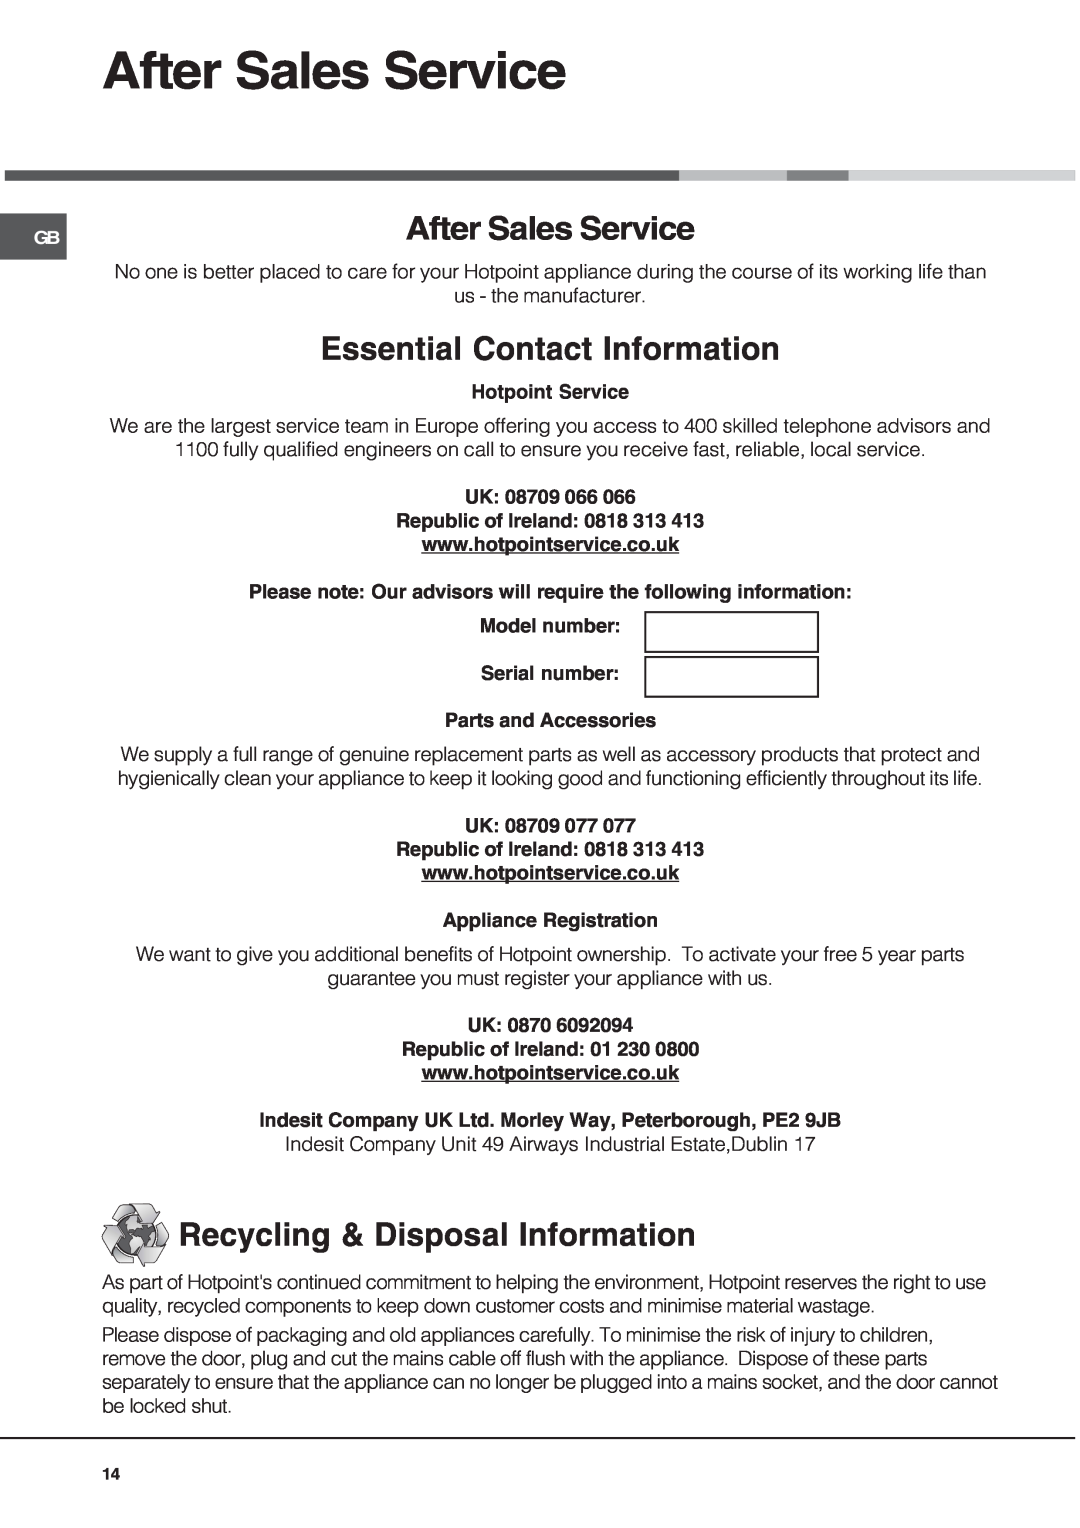 Hotpoint SE101PGX manual After Sales Service, Essential Contact Information, Recycling & Disposal Information 